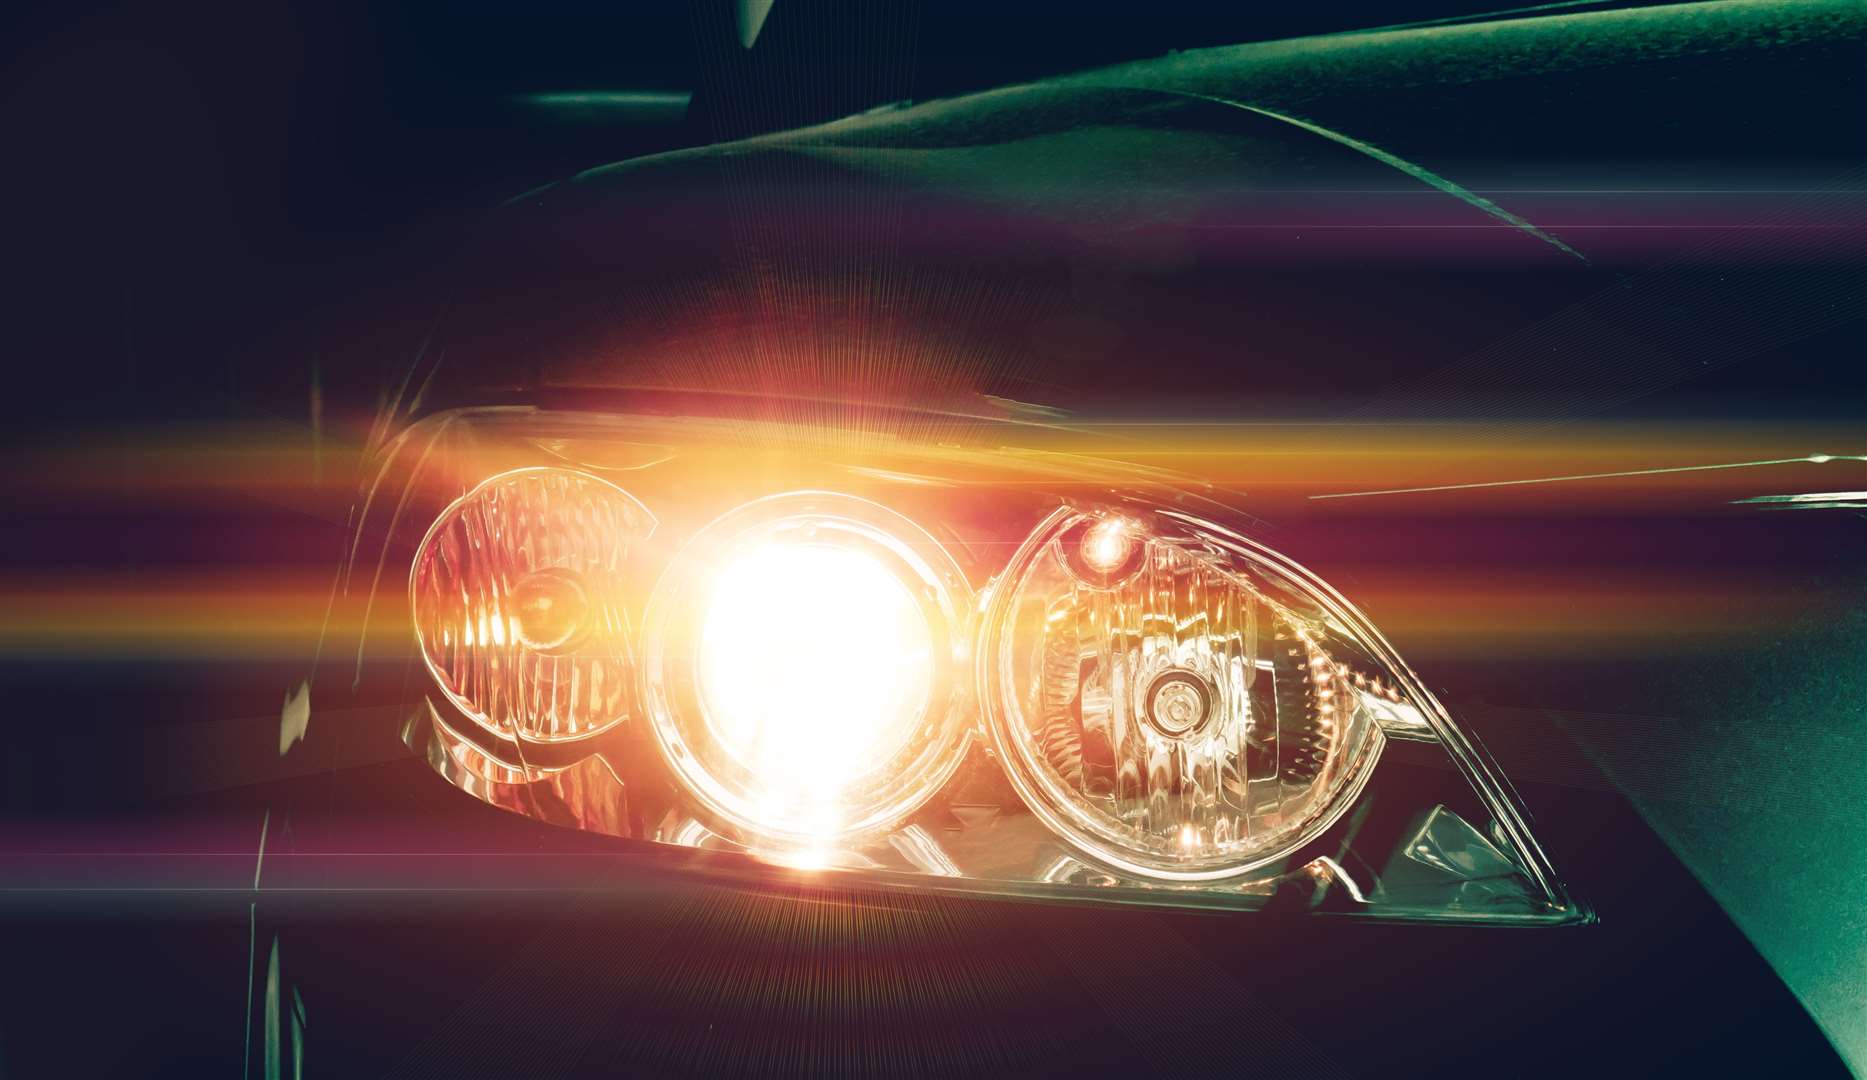 Driving with only one working headlight may get you into trouble, particularly if that too were to fail